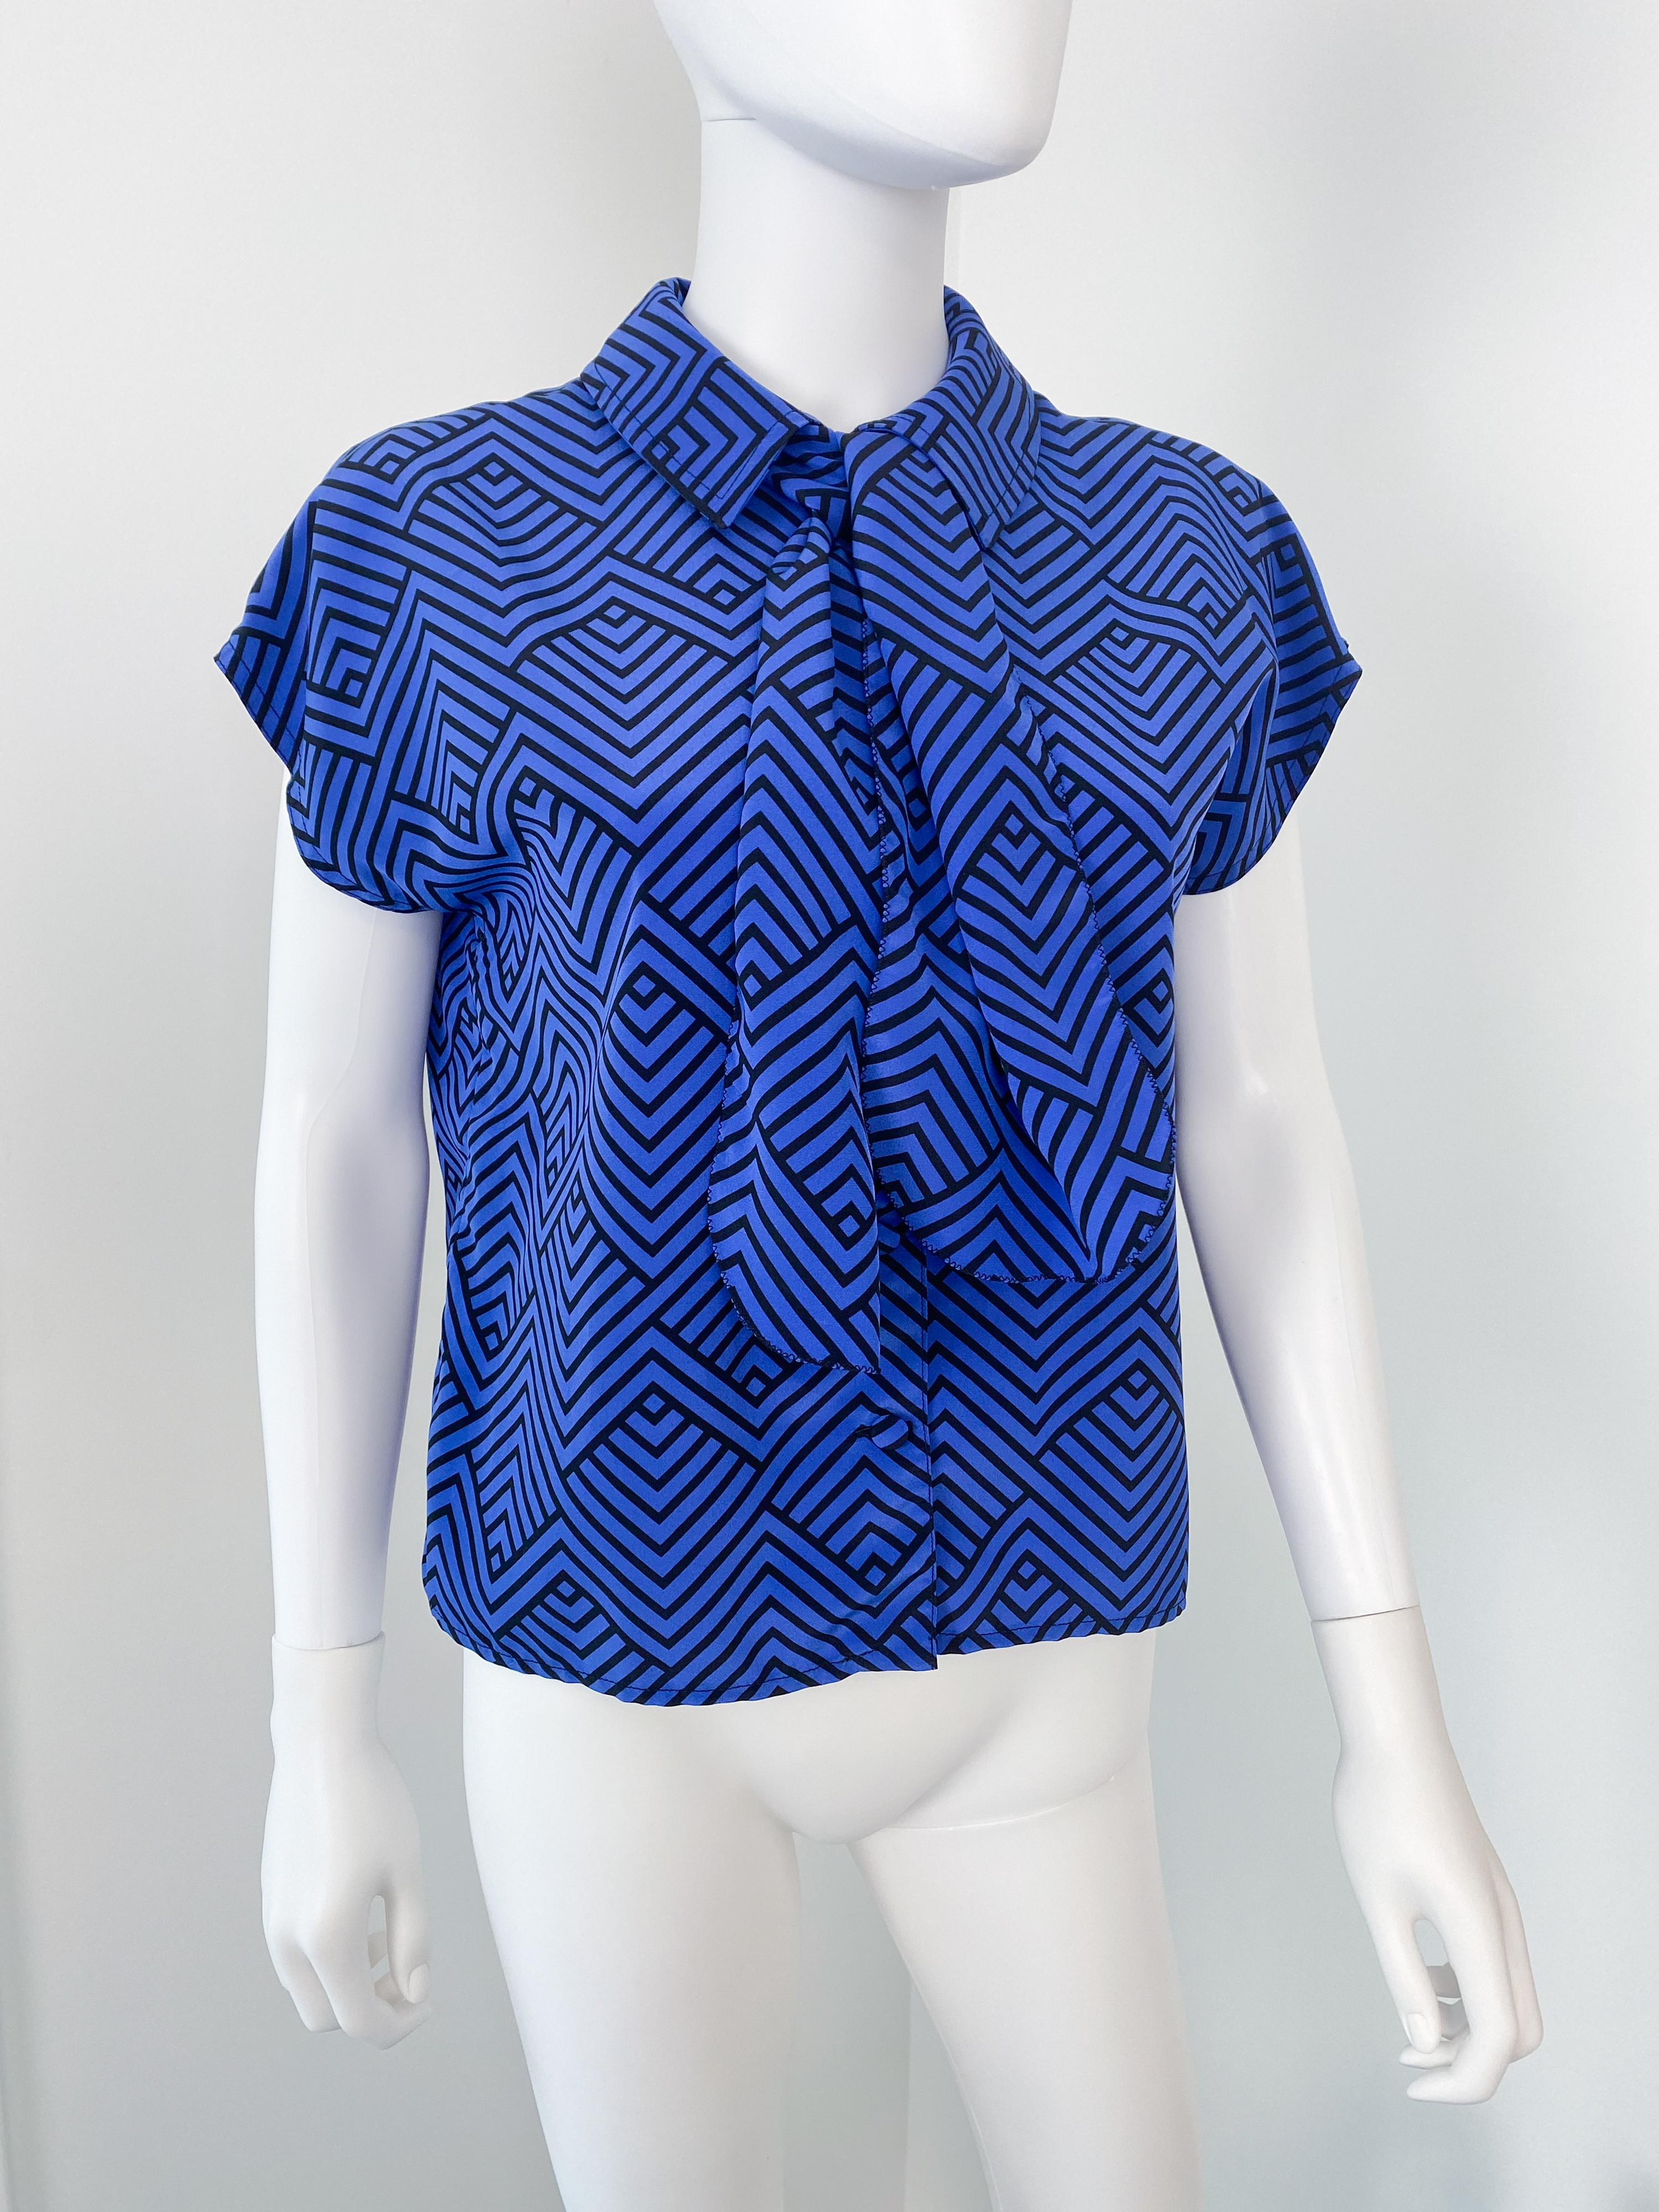 Women's Vintage 1980s Silky Polyester Blouse Top Black and Blue ZigZag Size 8/10 For Sale